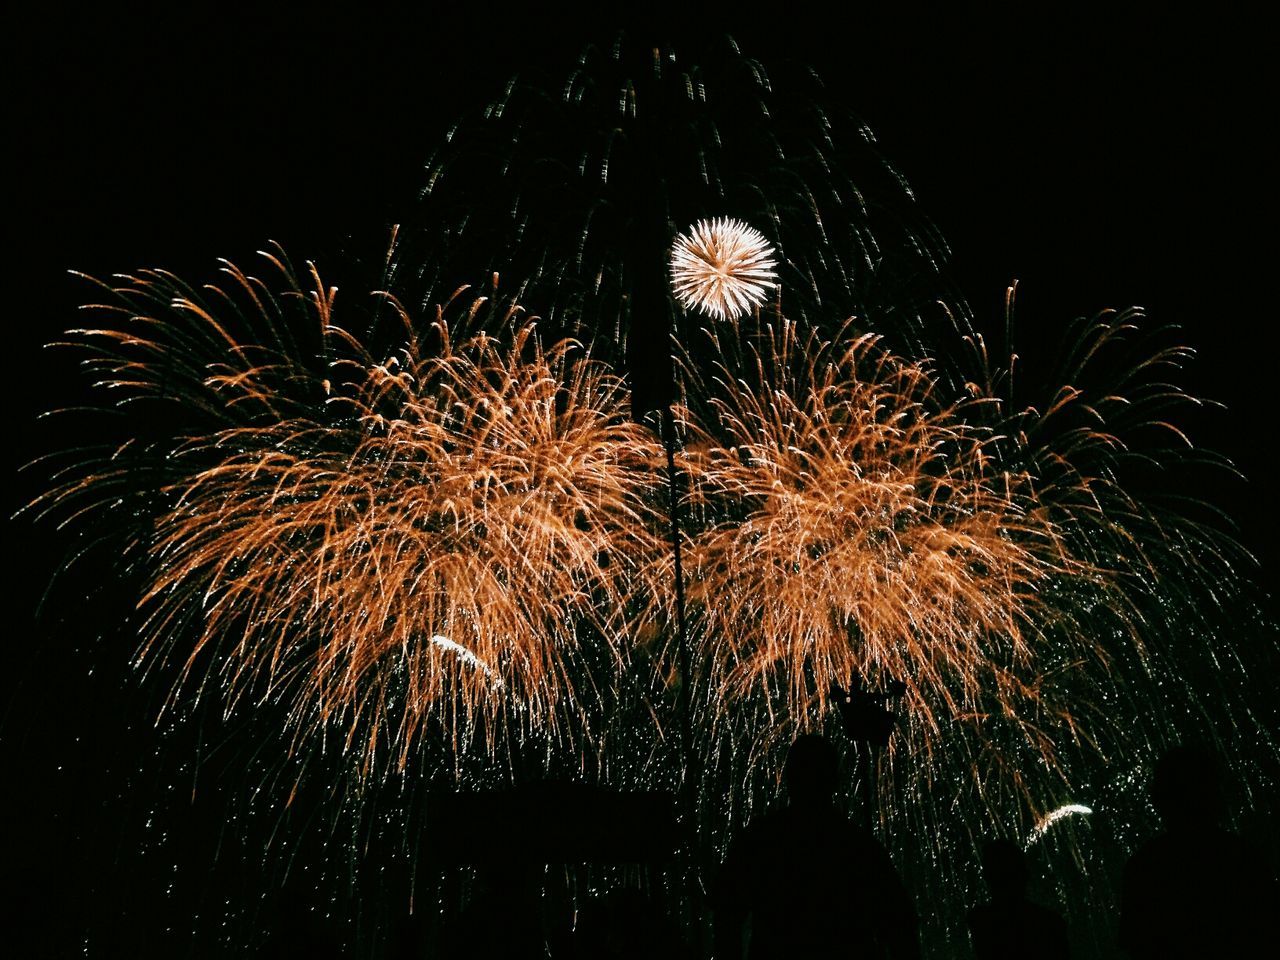 Close-up of dandelion flower against fire crackers in the dark